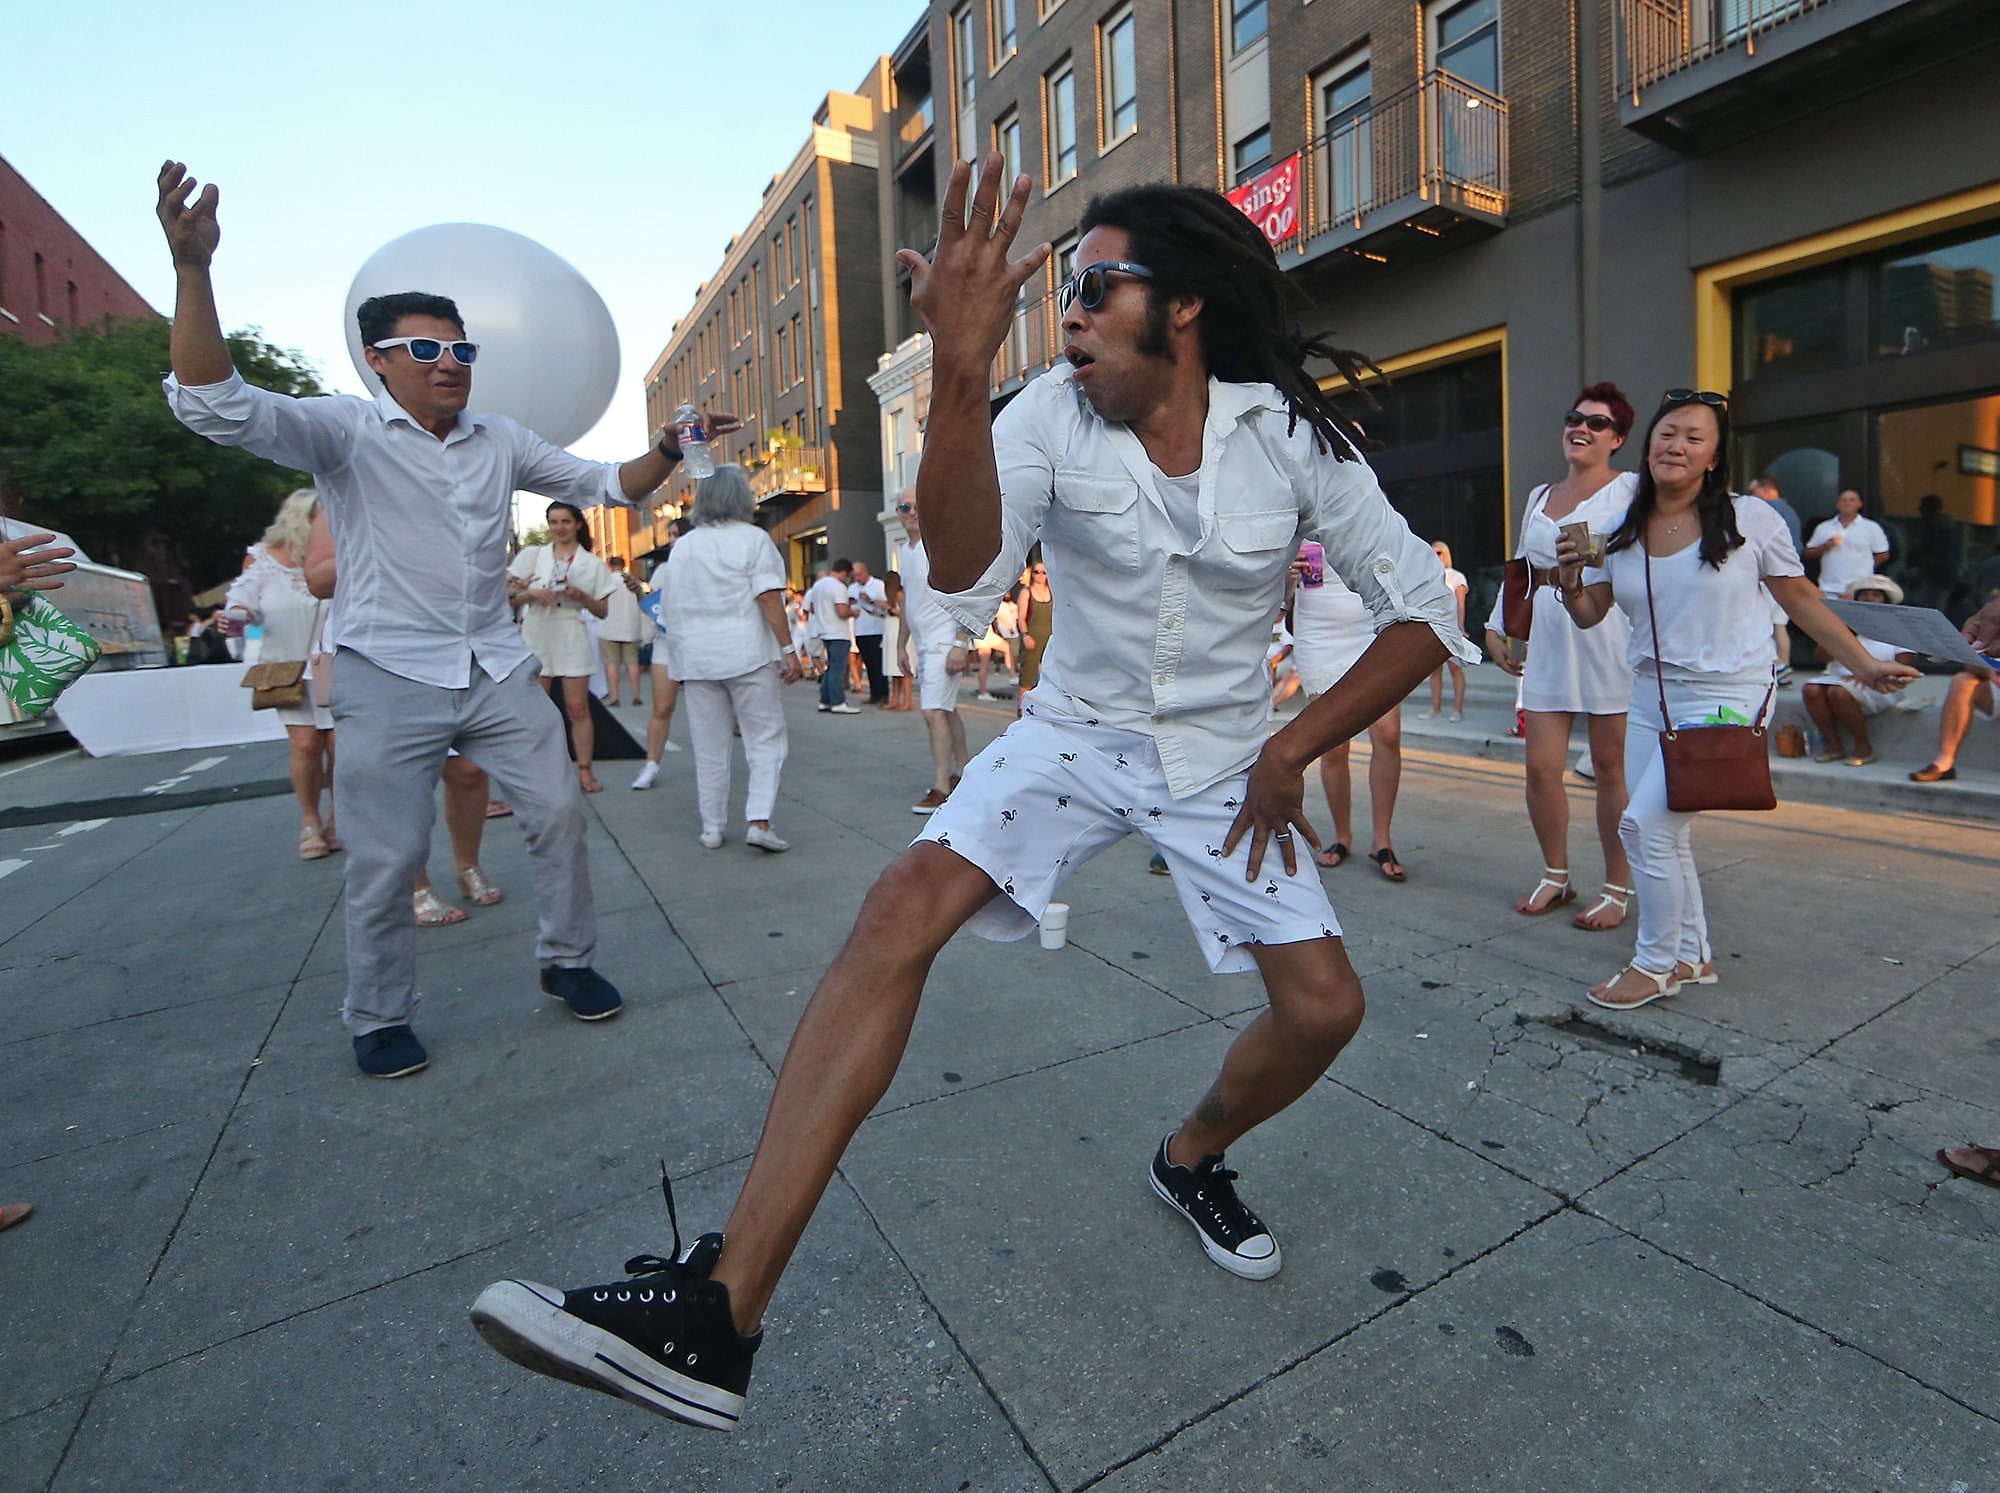 Brien Teasley dances in front of the stage in the 700 block of Julia Street during the 25th annual Hancock Whitney White Linen Night in the 300 to 700 blocks of Julia Street as well as other venues around the Arts District New Orleans. The free block party featured live music, food and drink from over thirty local vendors, gallery openings, and displays of public art, all benefiting the Contemporary Arts Center.